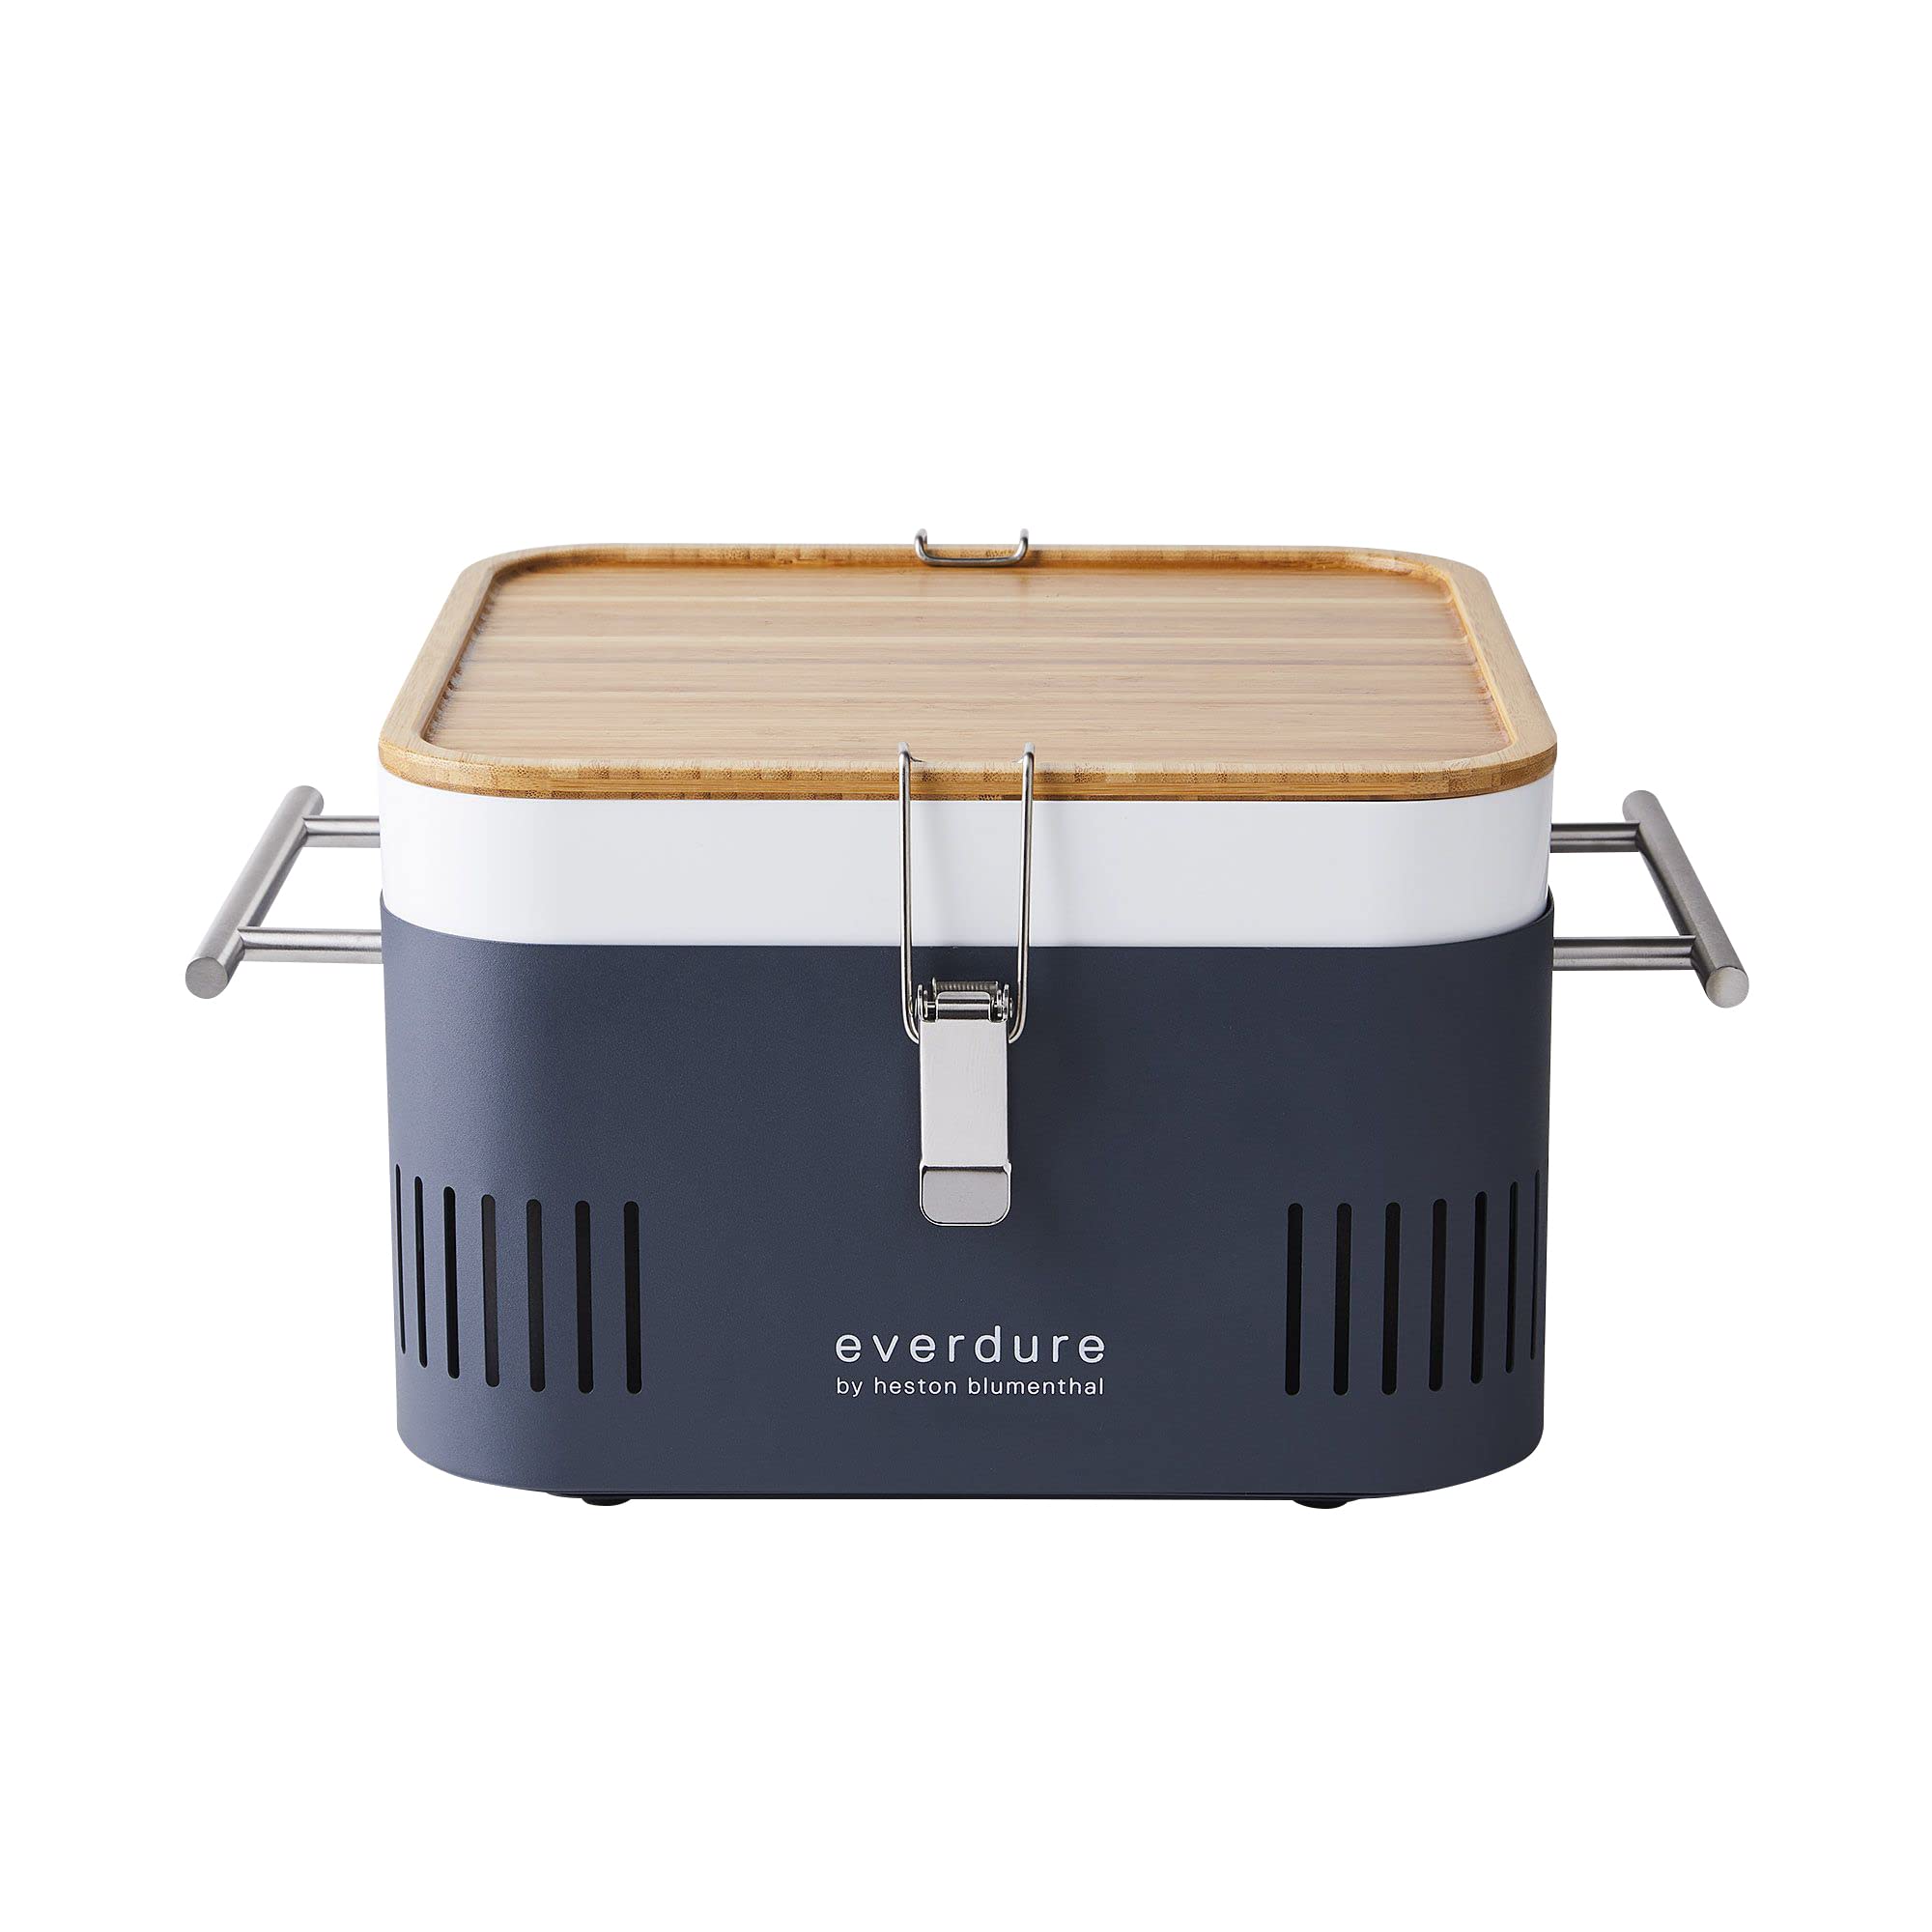 Everdure CUBE Portable Charcoal Grill, Tabletop BBQ $110.40 Amazon